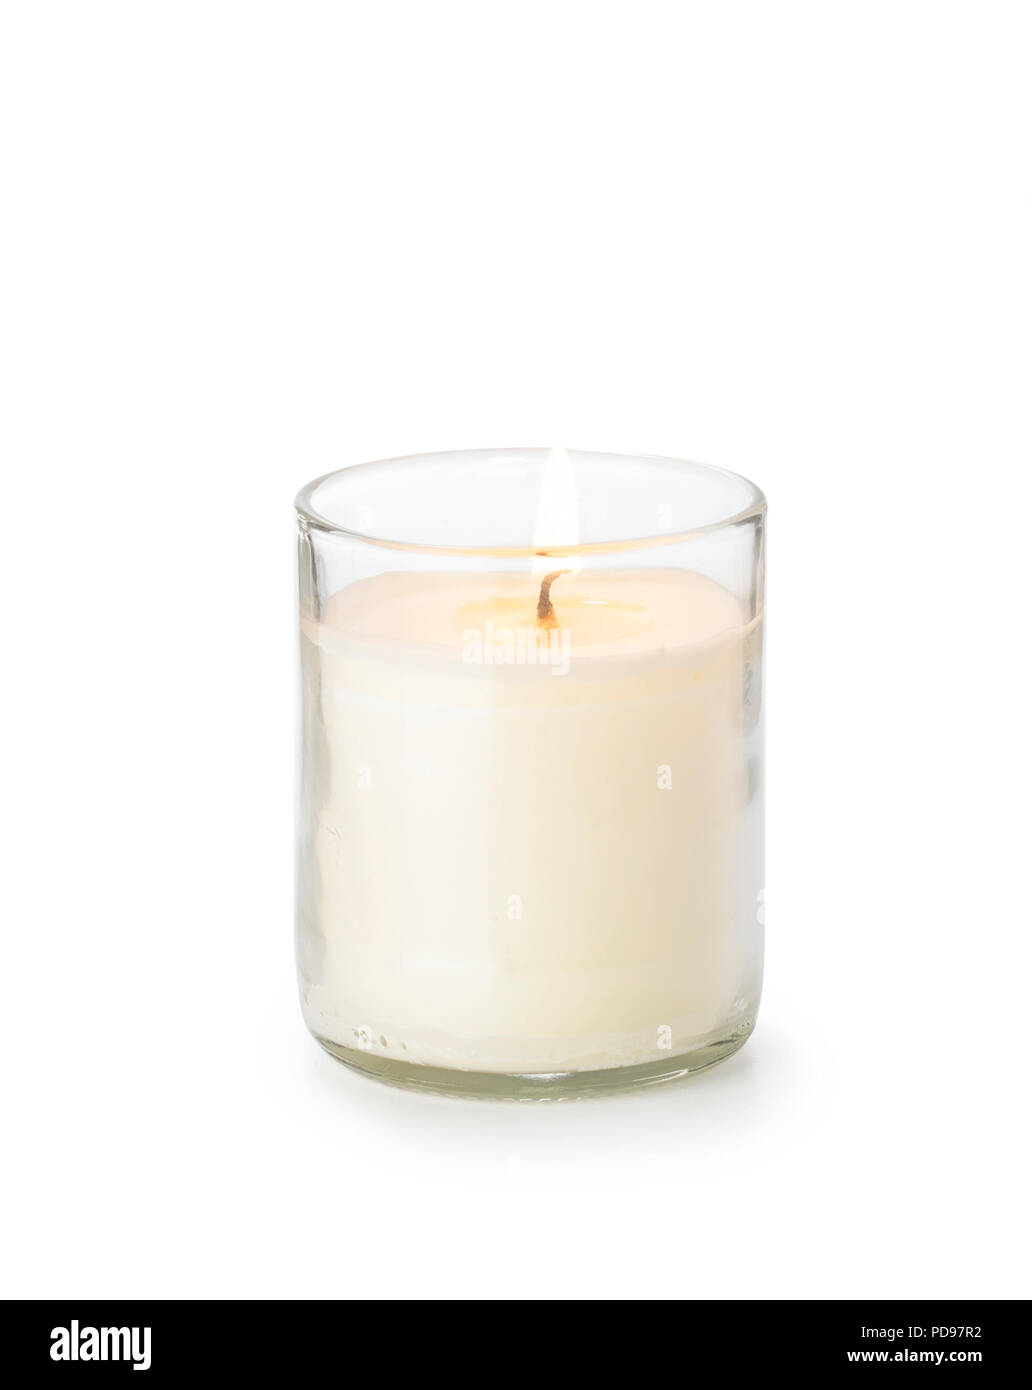 White candle with flame Stock Photo